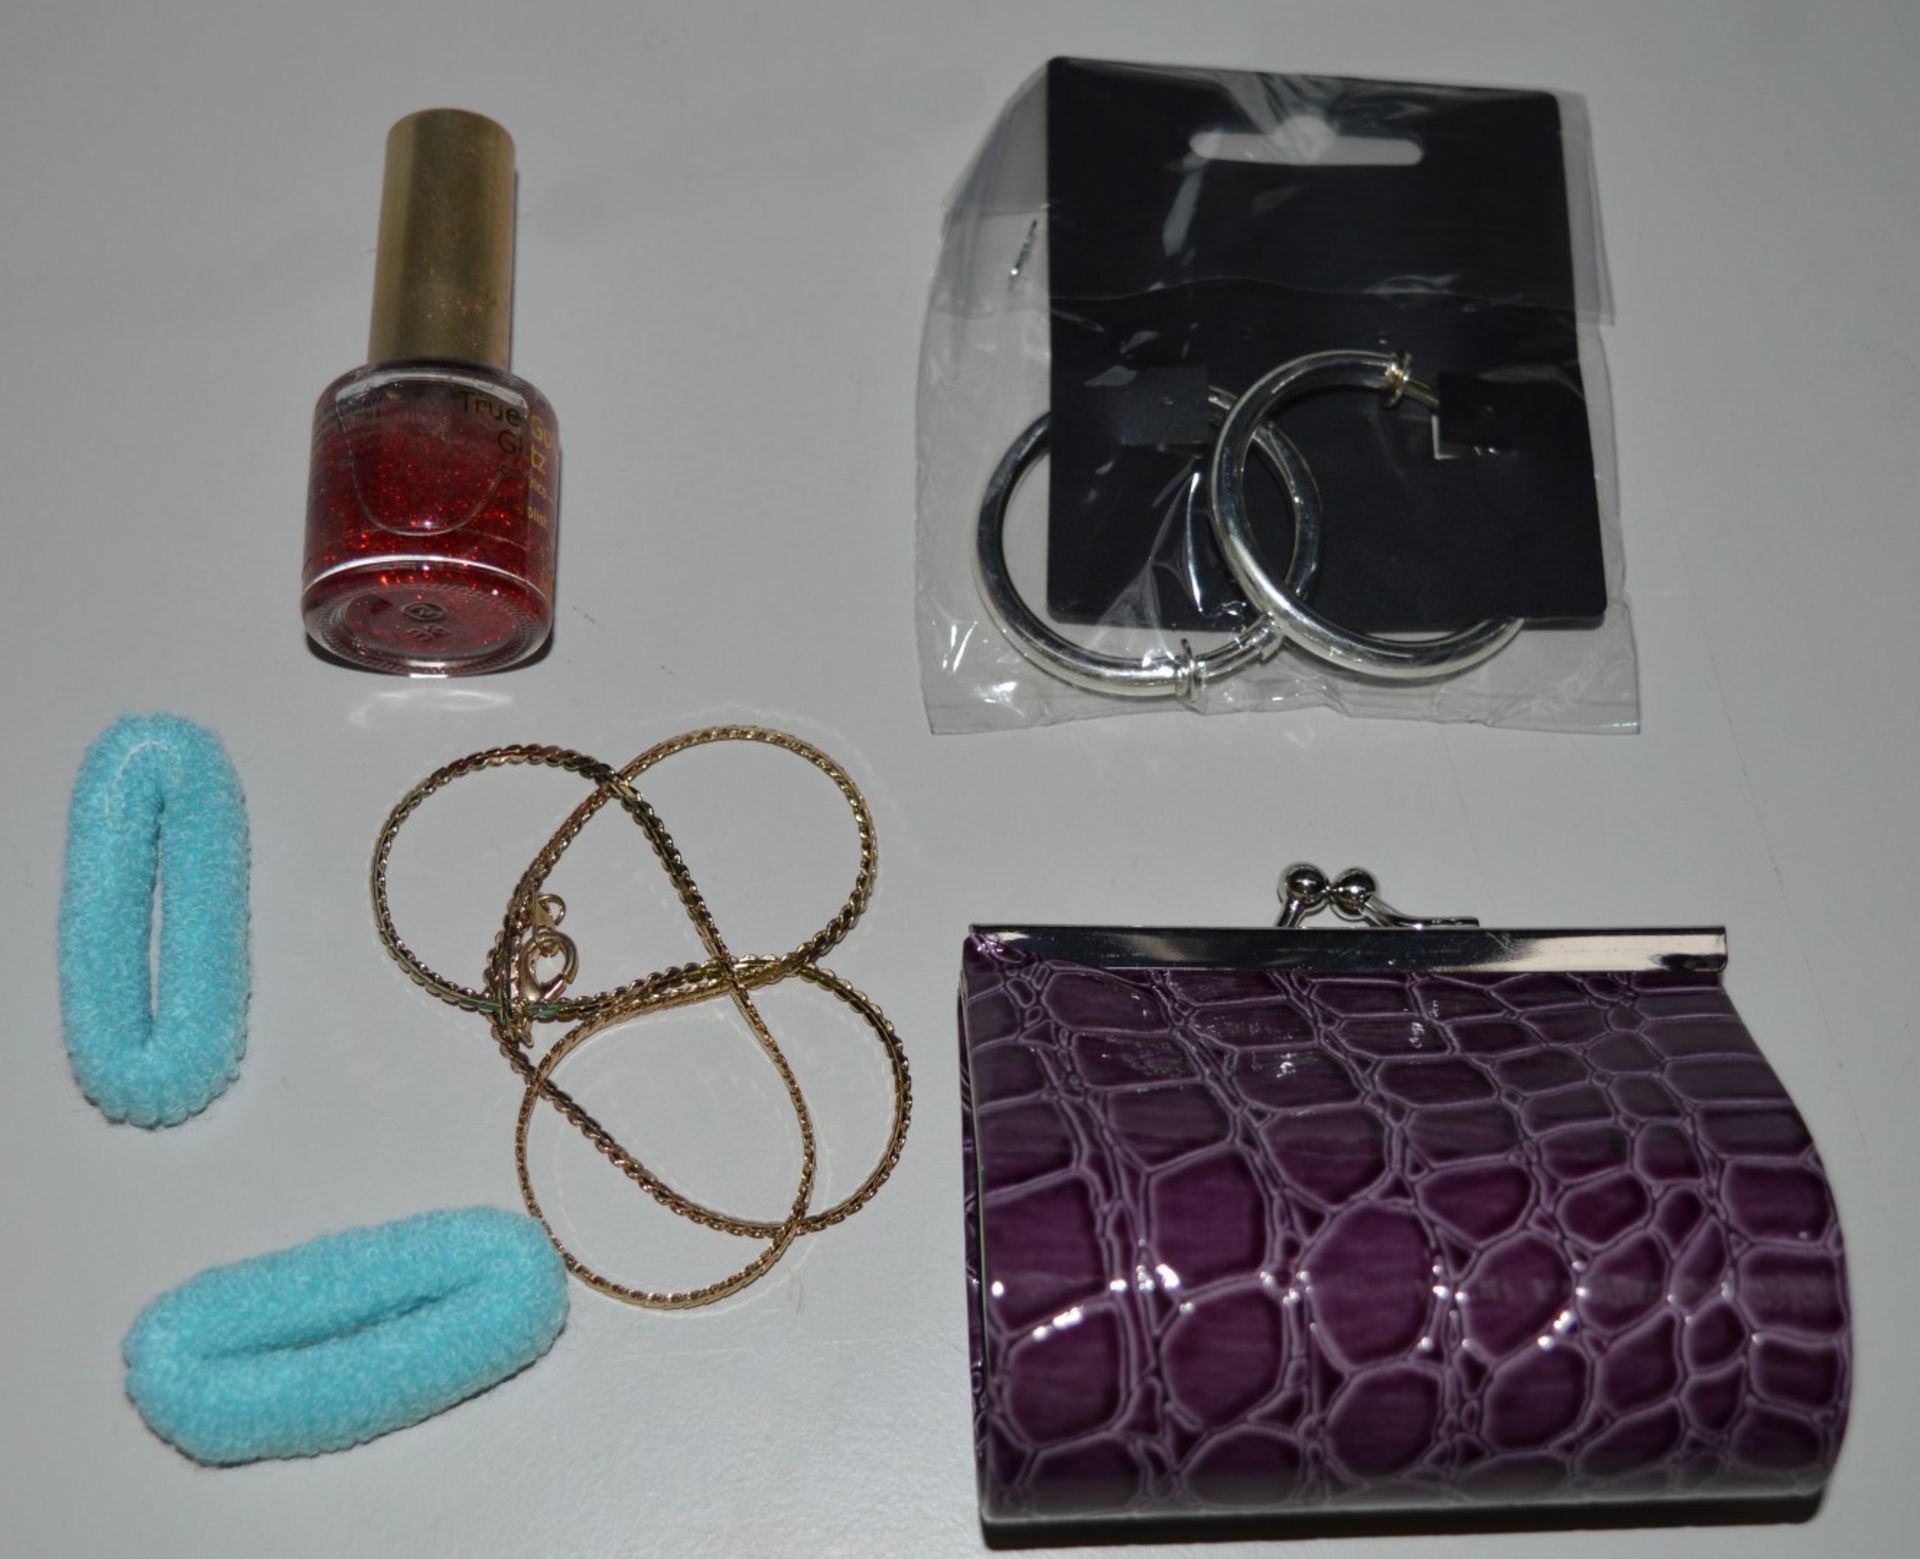 200 x Girls Beauty Gift Sets - Each Set Includes Items Such as a Stylish Purse, Ear Rings, Hair - Image 6 of 14